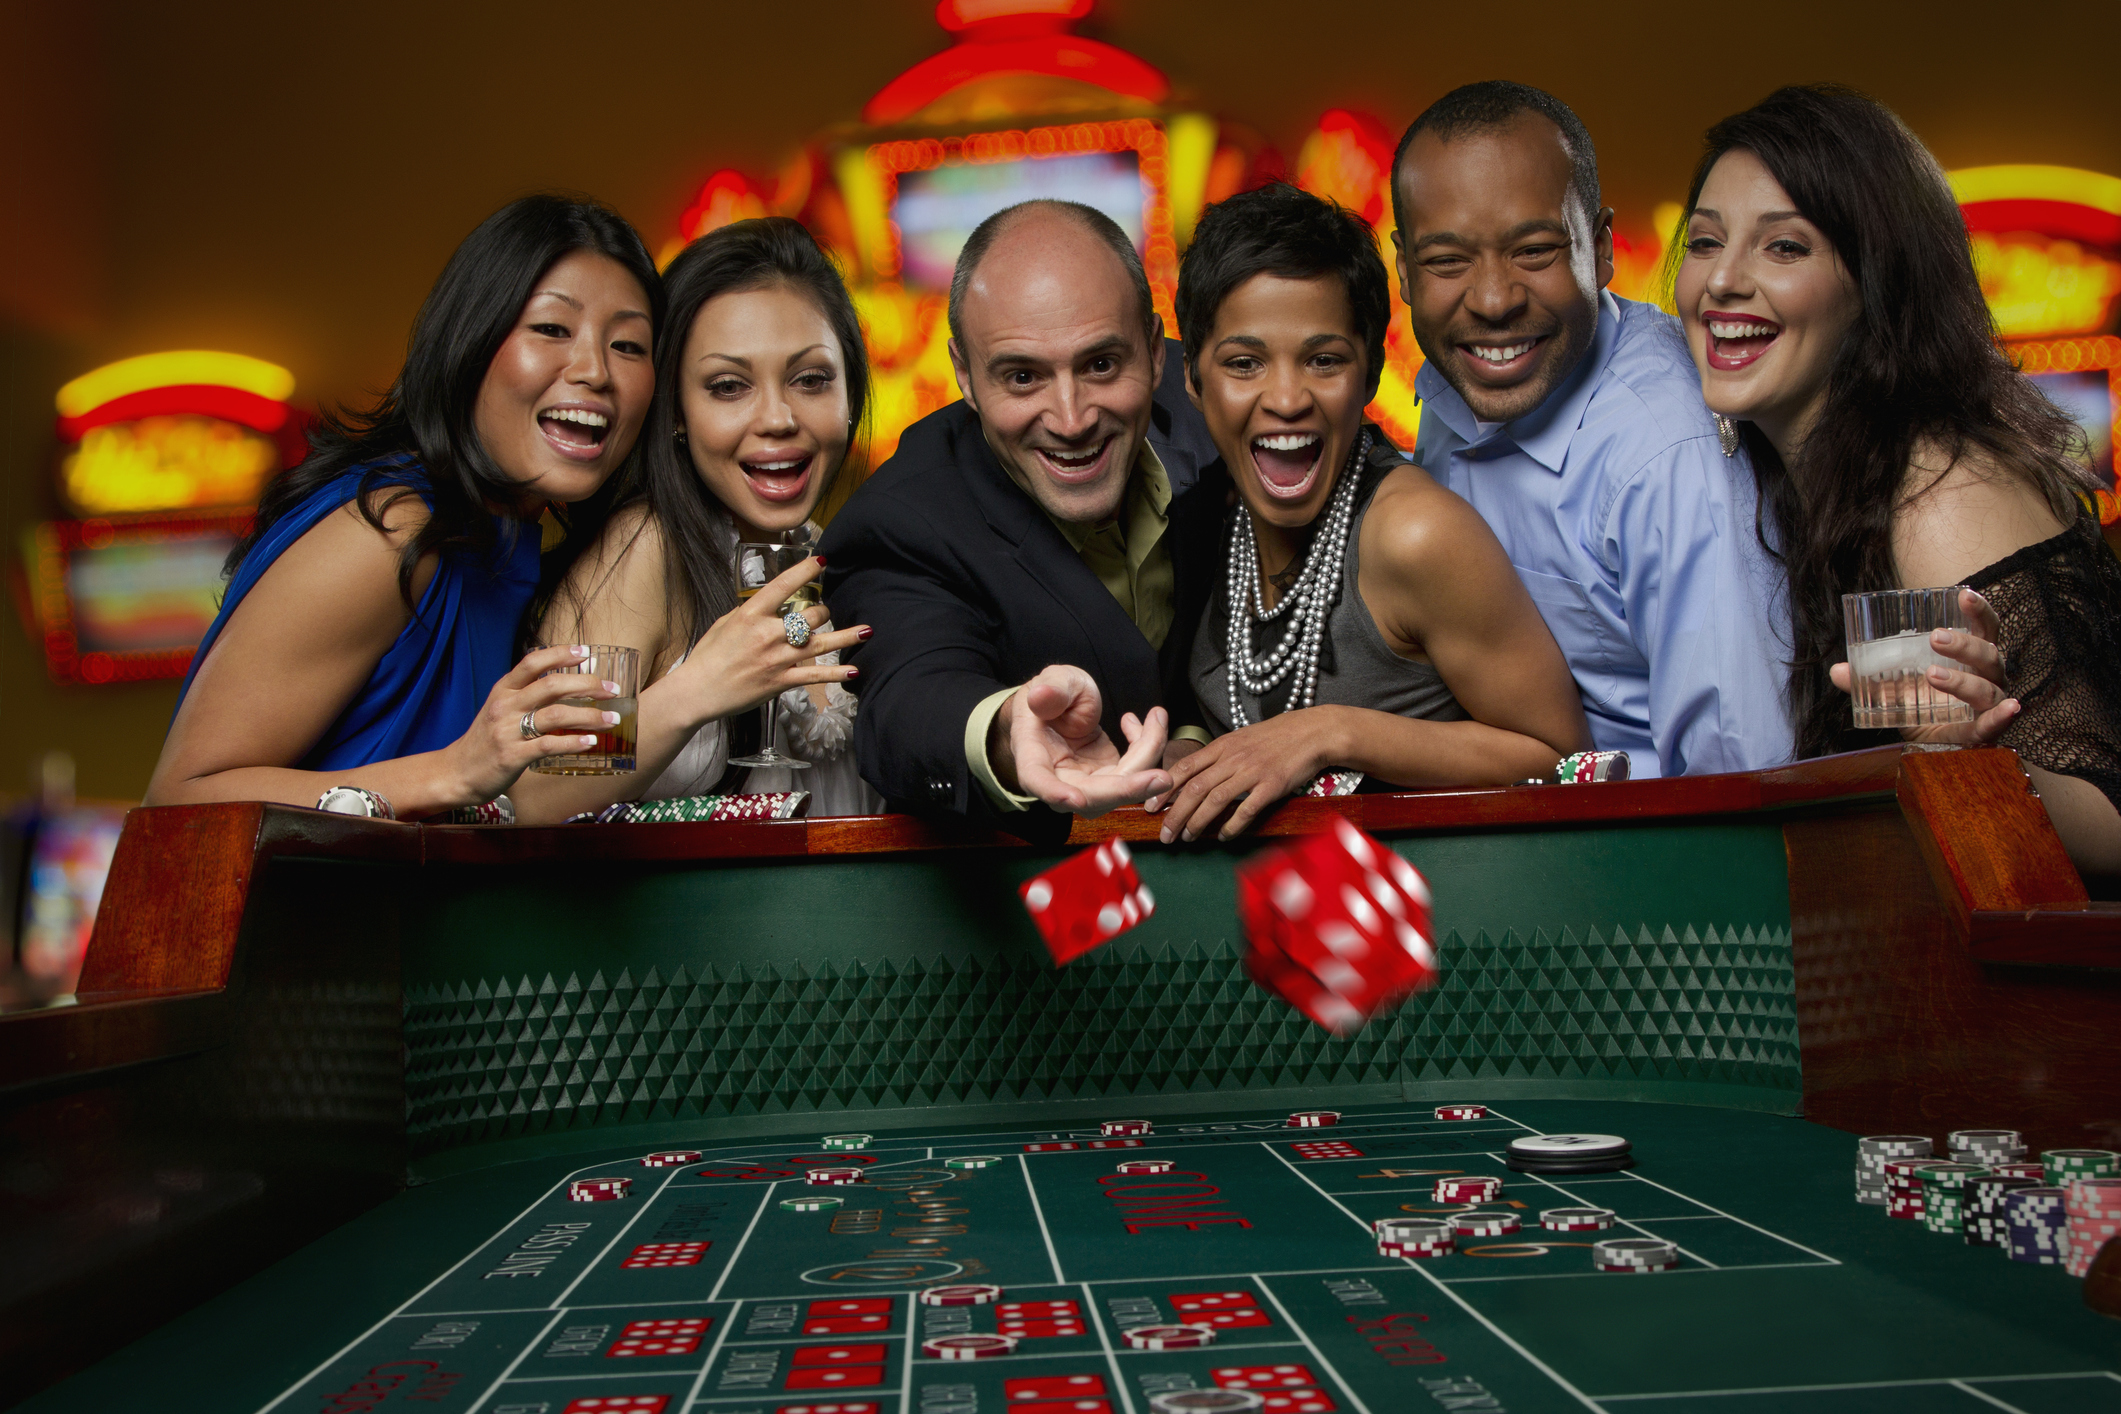 Get Ranked With This SEO Package For Casino Or Gambling Websites Google 1st  page for $999 - SEOClerks